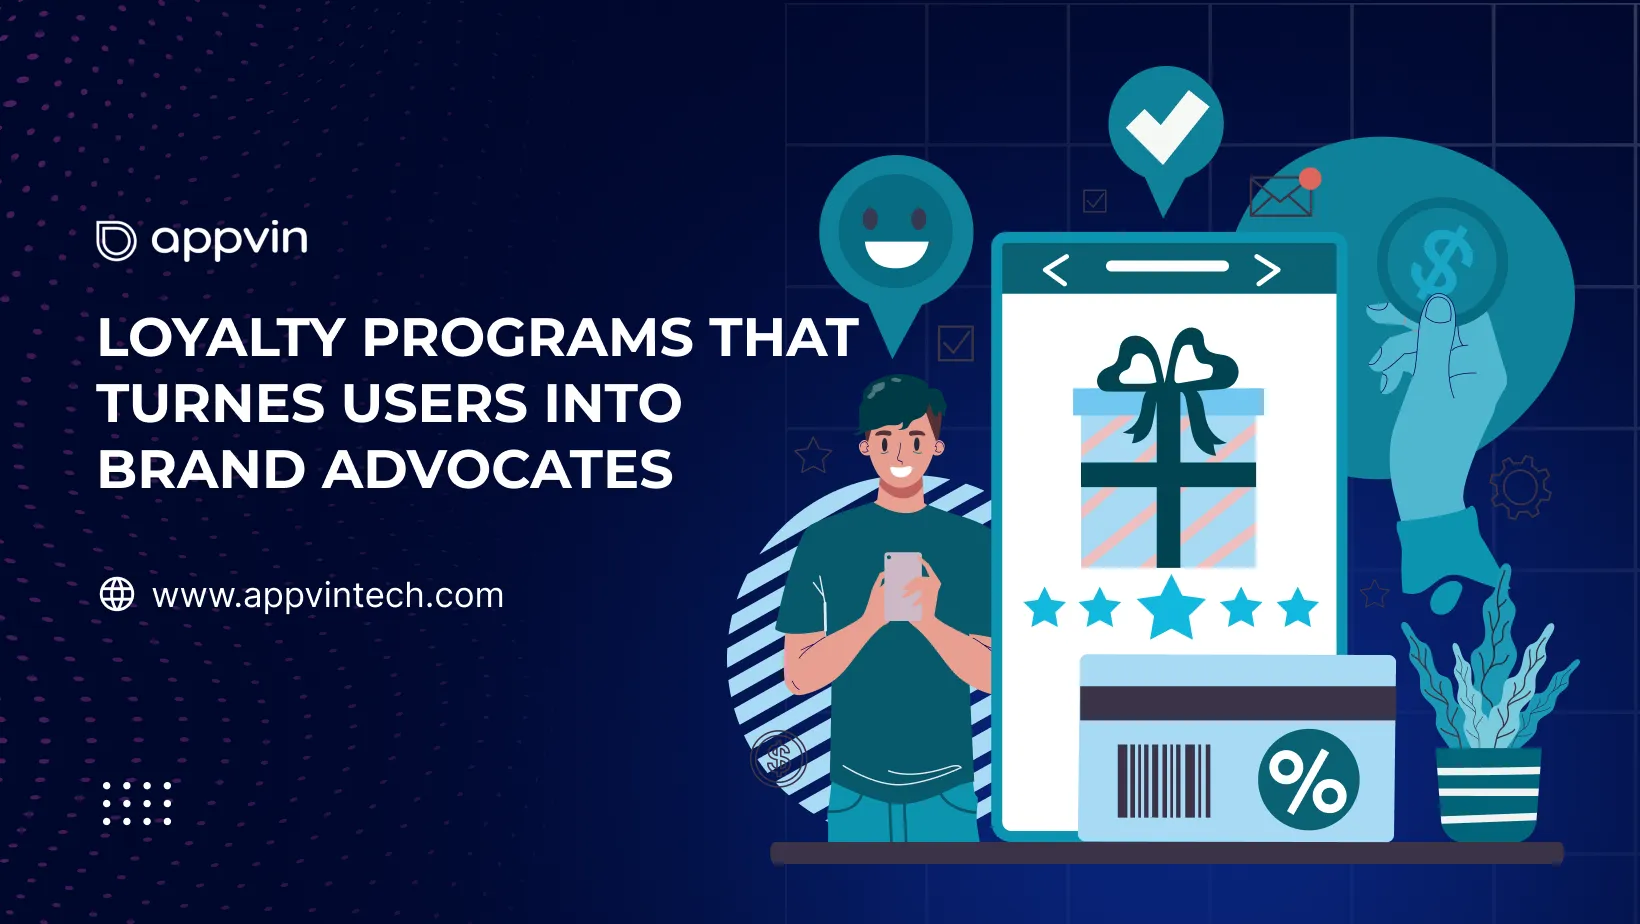 Loyalty-Programs-That-Turnes-Users-into-Brand-Advocates-AppVin-Technologies